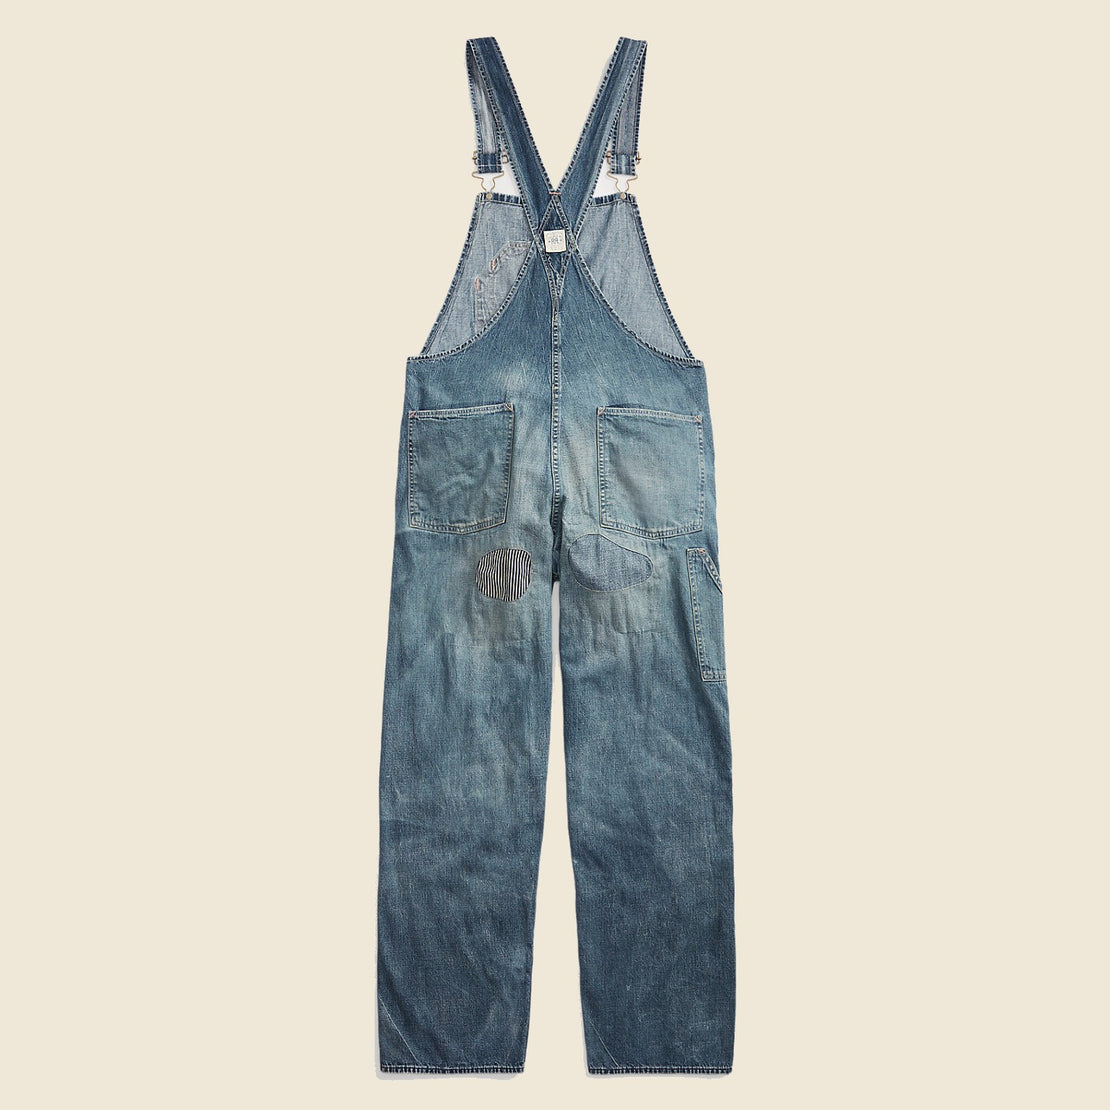 Westridge Overall - Repaired Danville Wash - RRL - STAG Provisions - W - Onepiece - Overalls